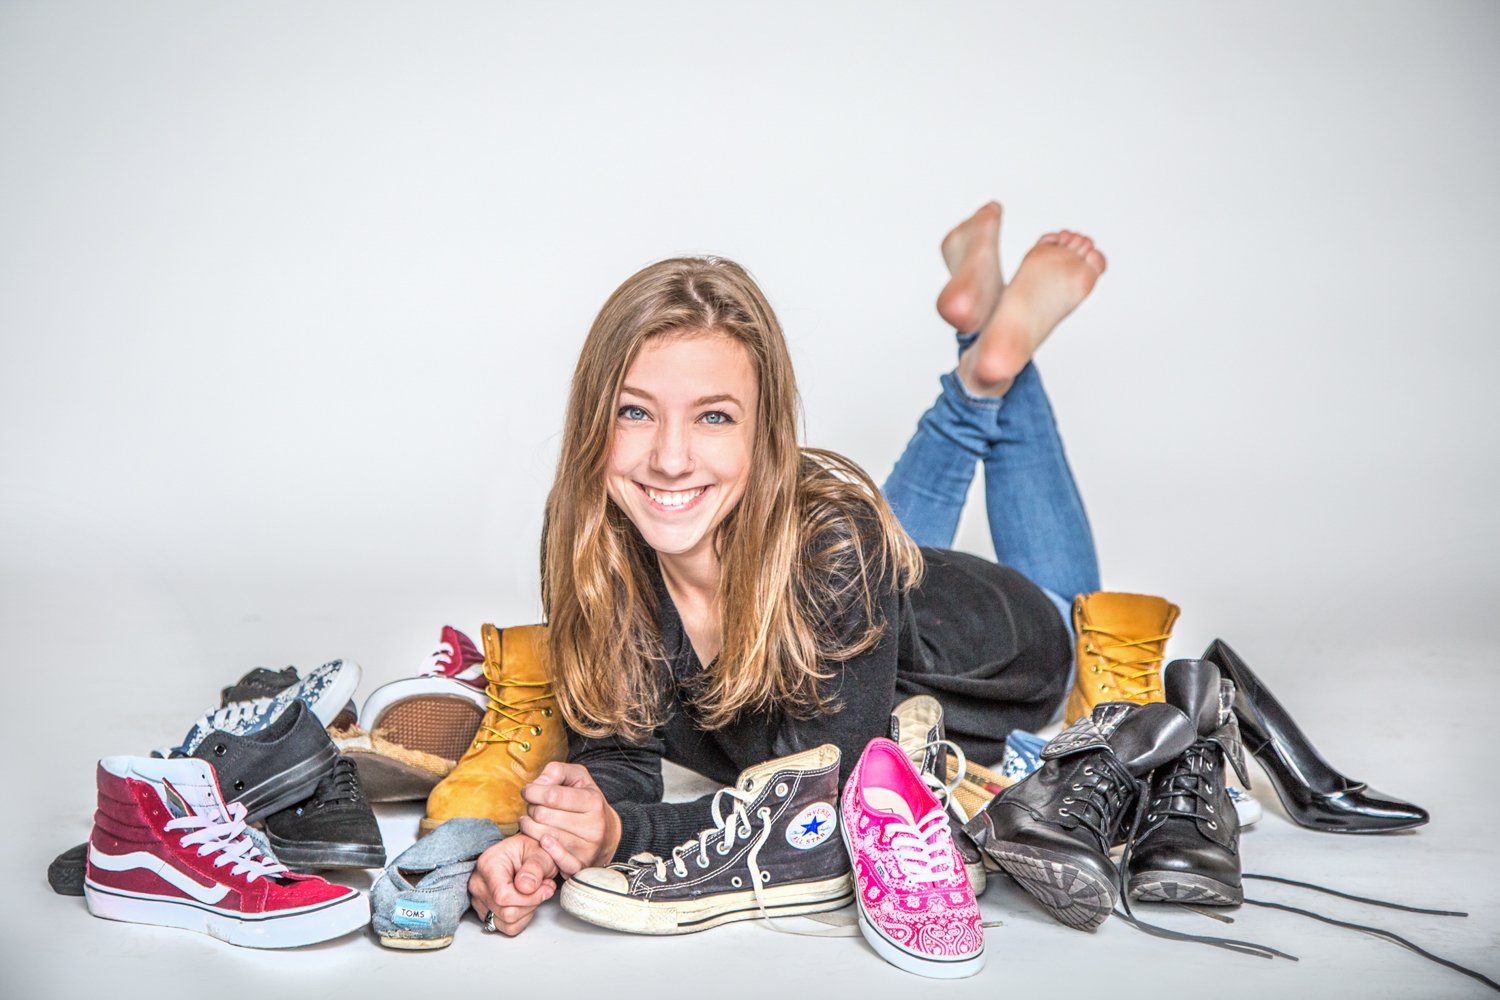 Portrait-HIgh-School-Seniors-girl-smiling-and-happy-surrounded-by-shoes-194.jpg